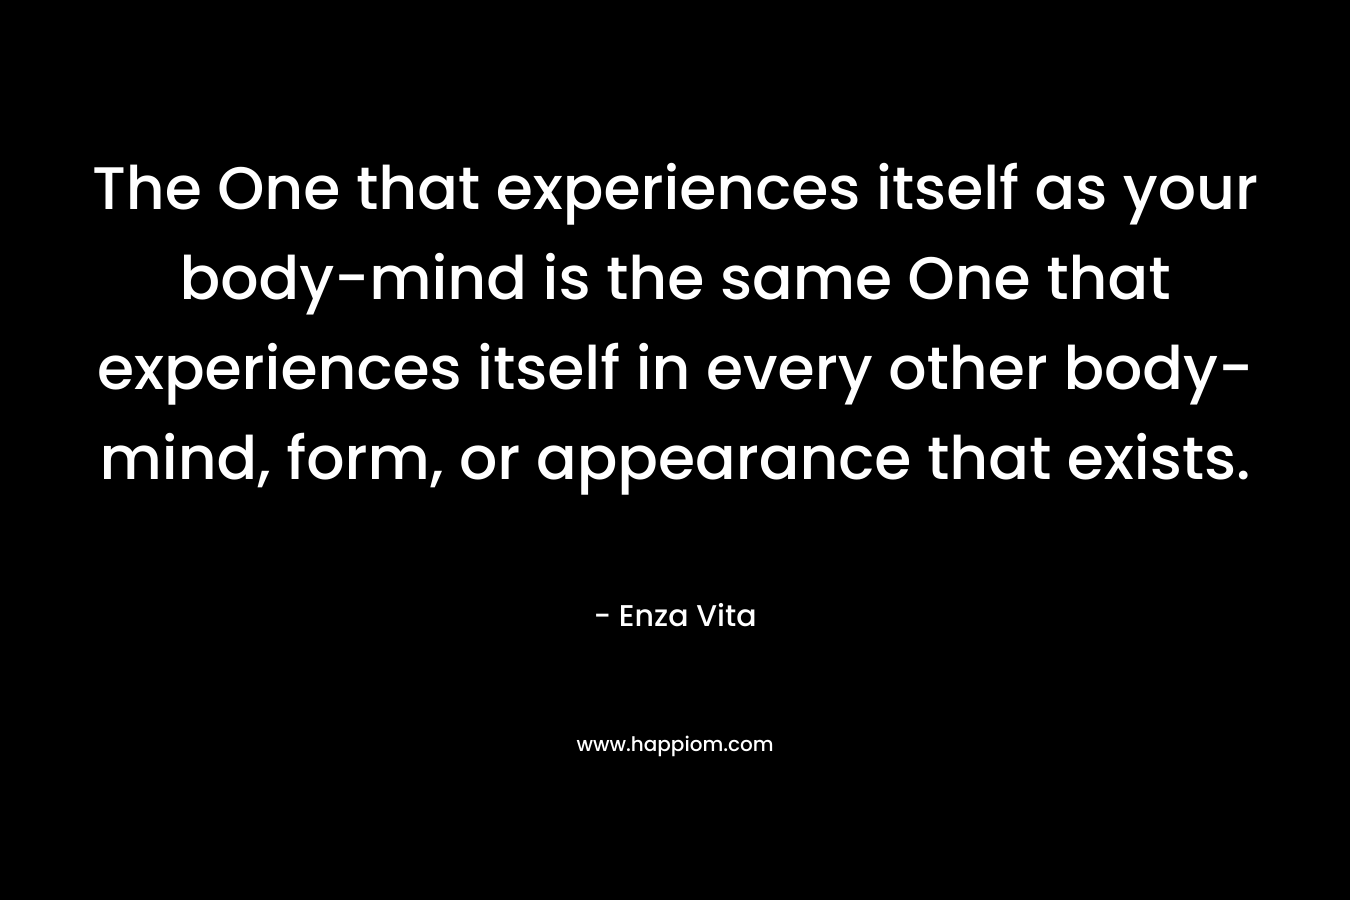 The One that experiences itself as your body-mind is the same One that experiences itself in every other body-mind, form, or appearance that exists.